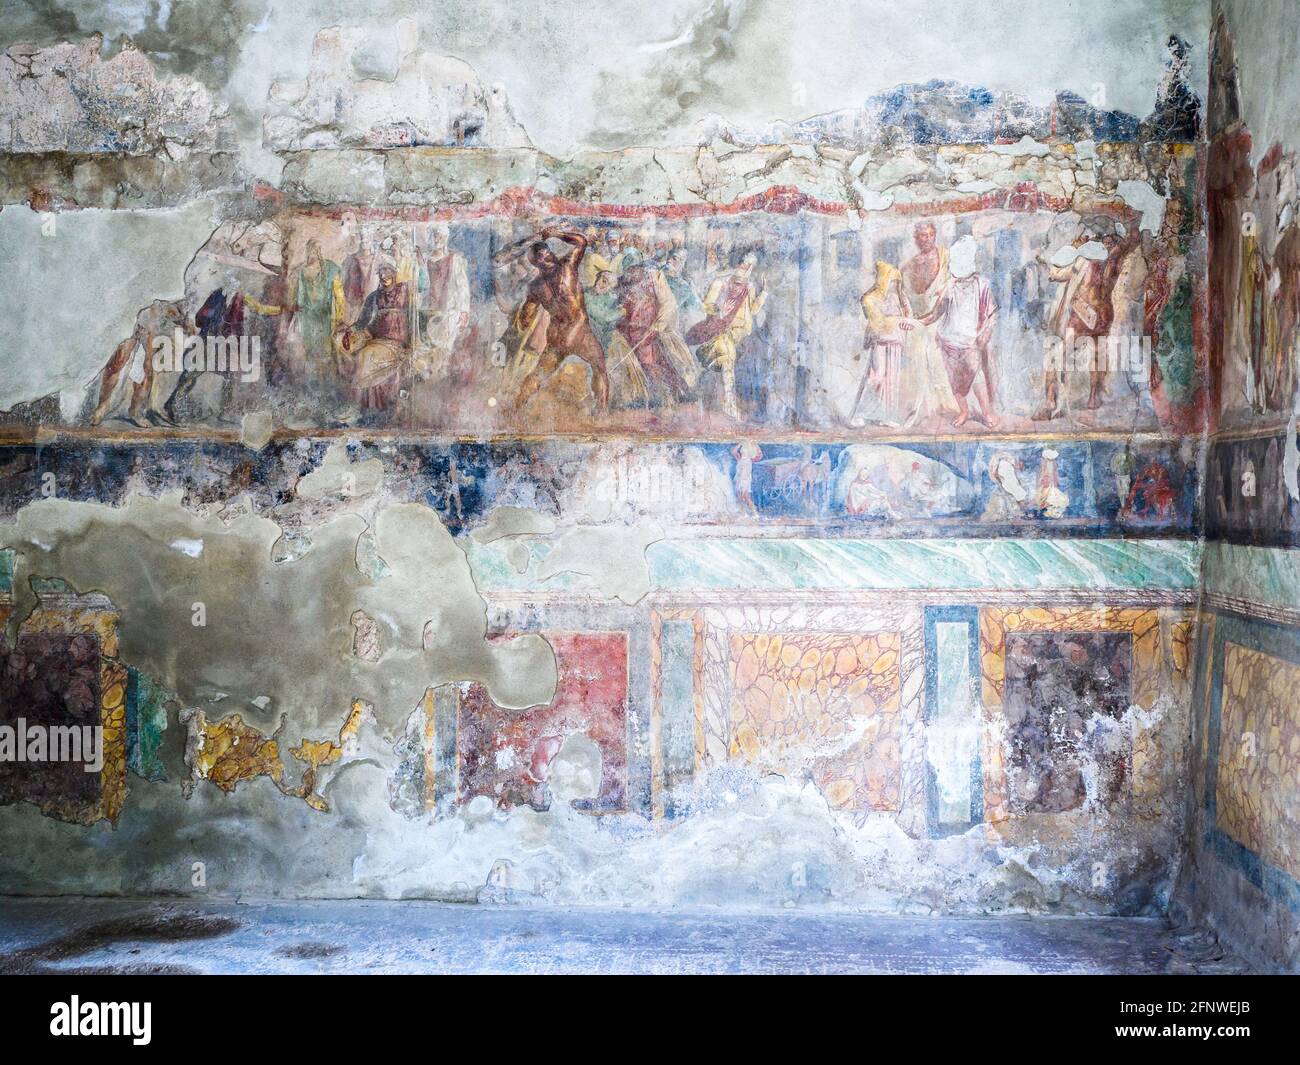 Richly decorated frescoes with scenes from the Illiad above a lower multi-coloured frieze of faux marble. The upper zone contains scenes from the myth of Hercules. Triclinium (dining room) - House of Octavius Quartio - Pompeii archaeological site, Italy Stock Photo